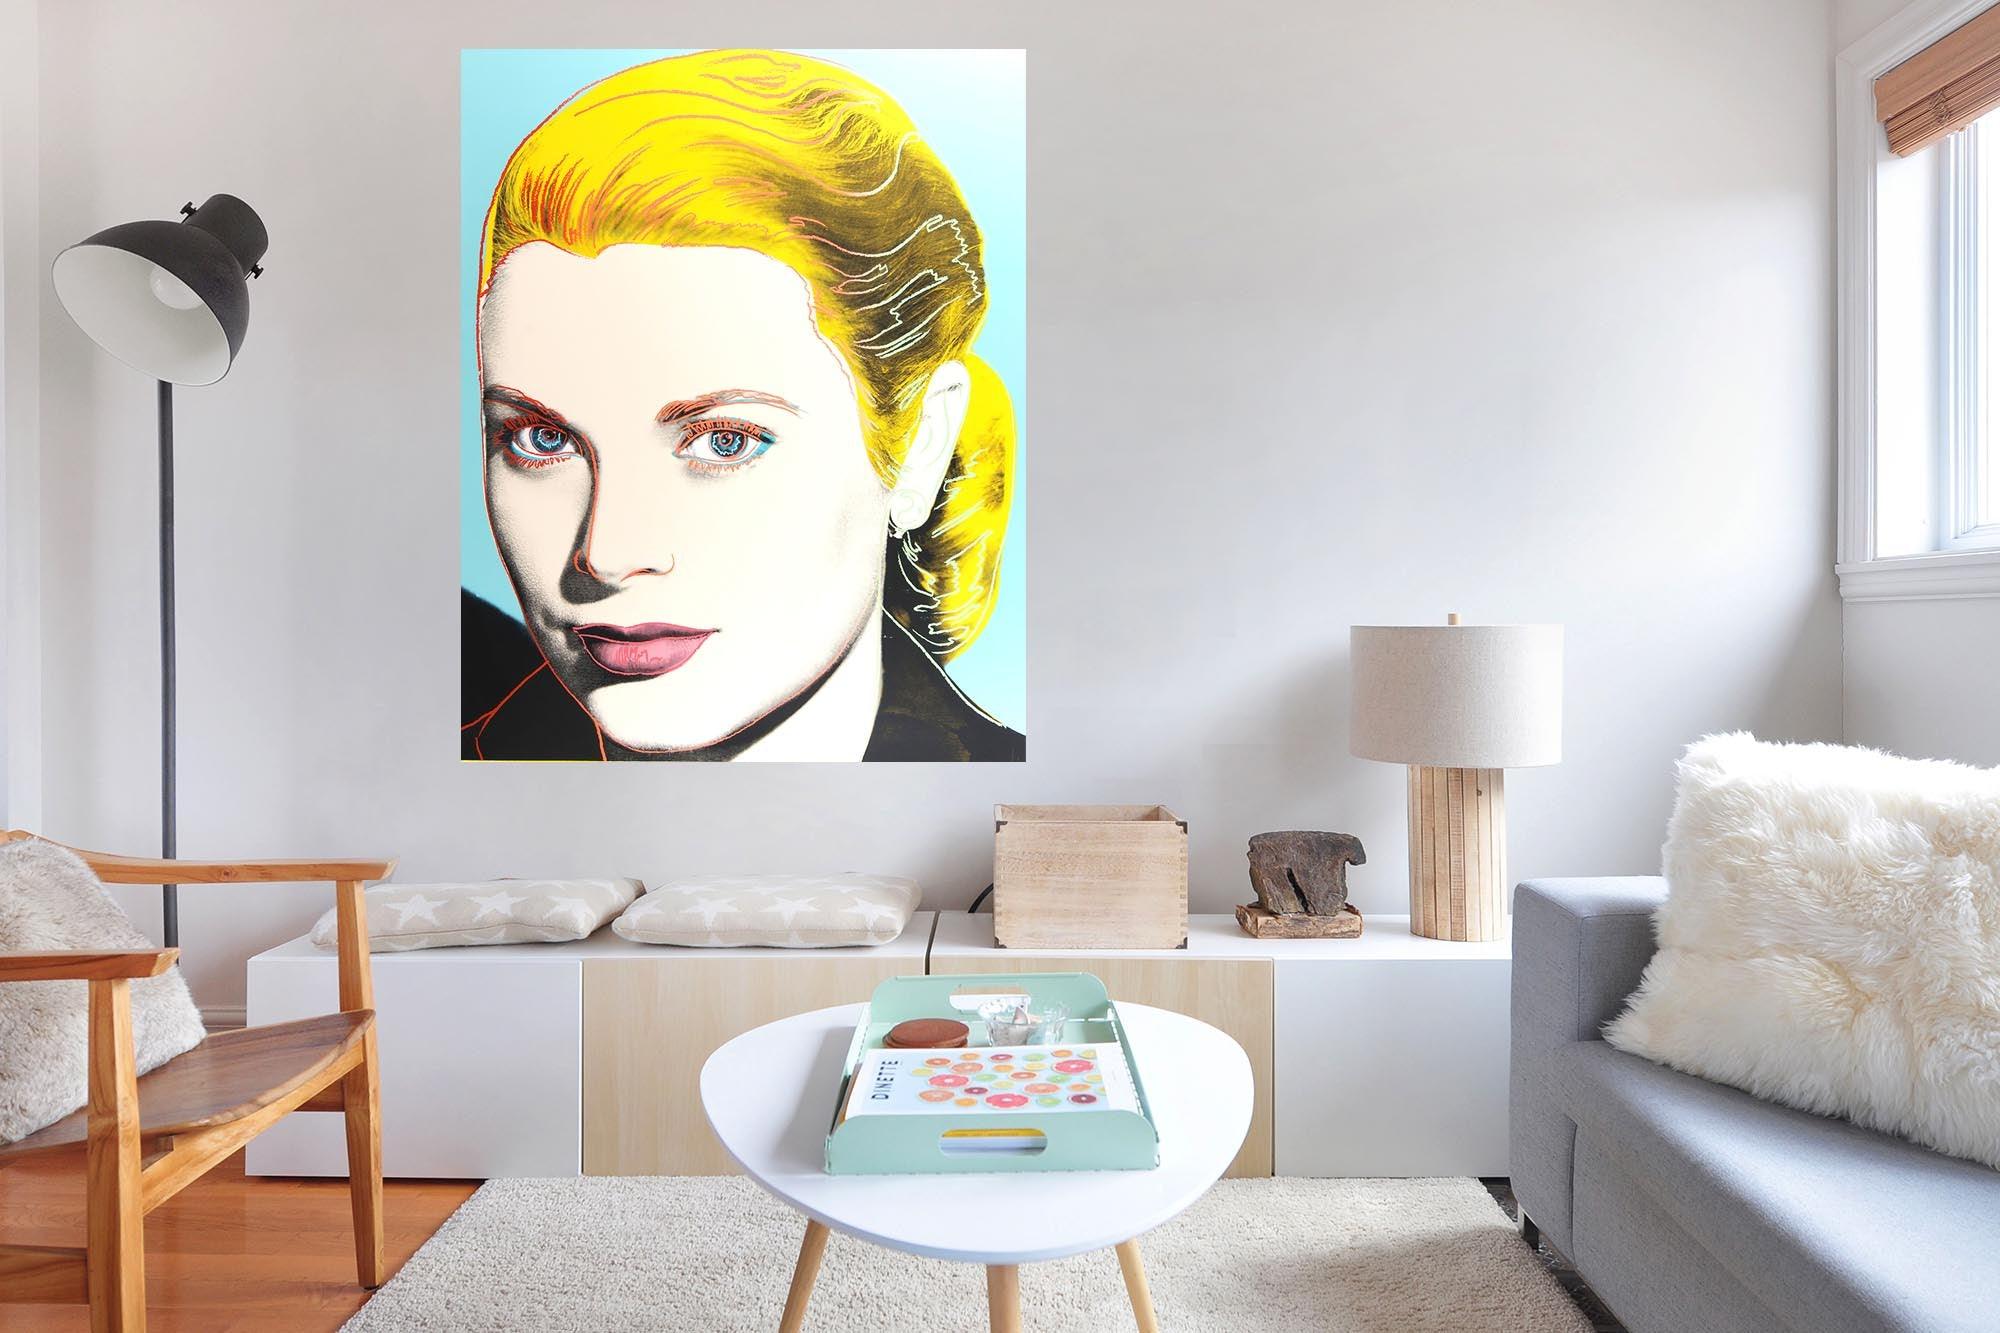 CoolWalls.ca Posters, Prints, & Visual Artwork Grace Kelly Andy Warhol Poster Vintage Artwork: Peel_n_Stick onto the wall, wallpaper like fabric